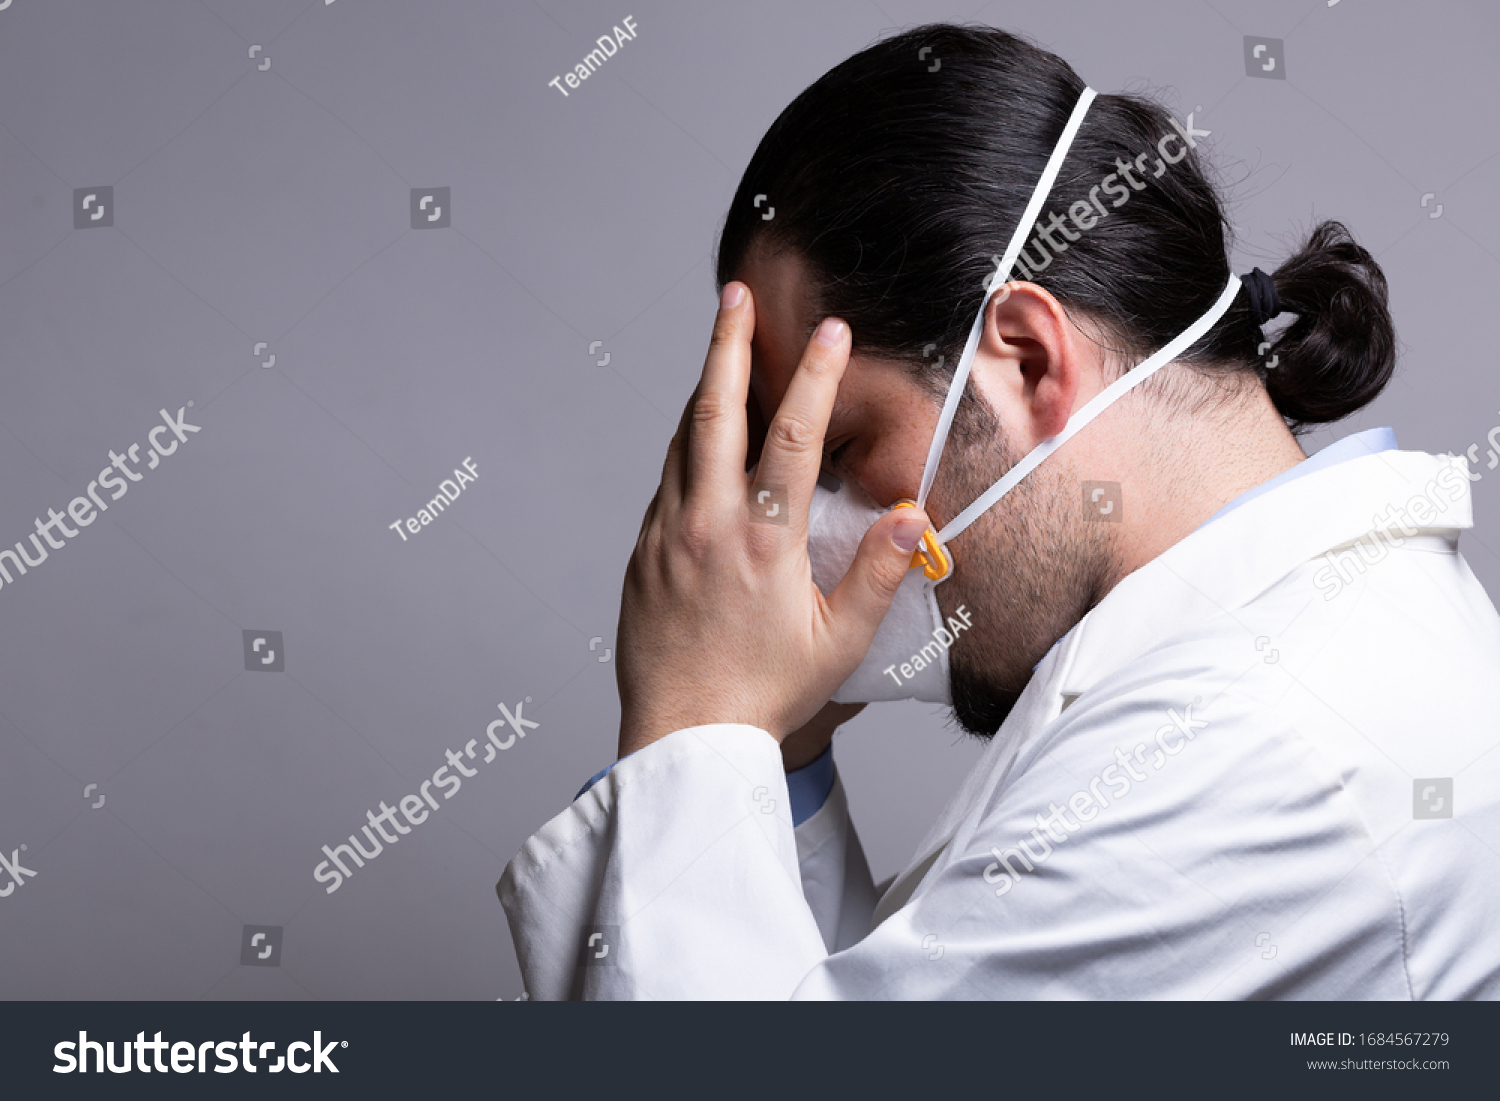 Frustrated medical doctor wearing a respiratory mask  touching his head with his hands. Burnout and medicine crisis concept. #1684567279